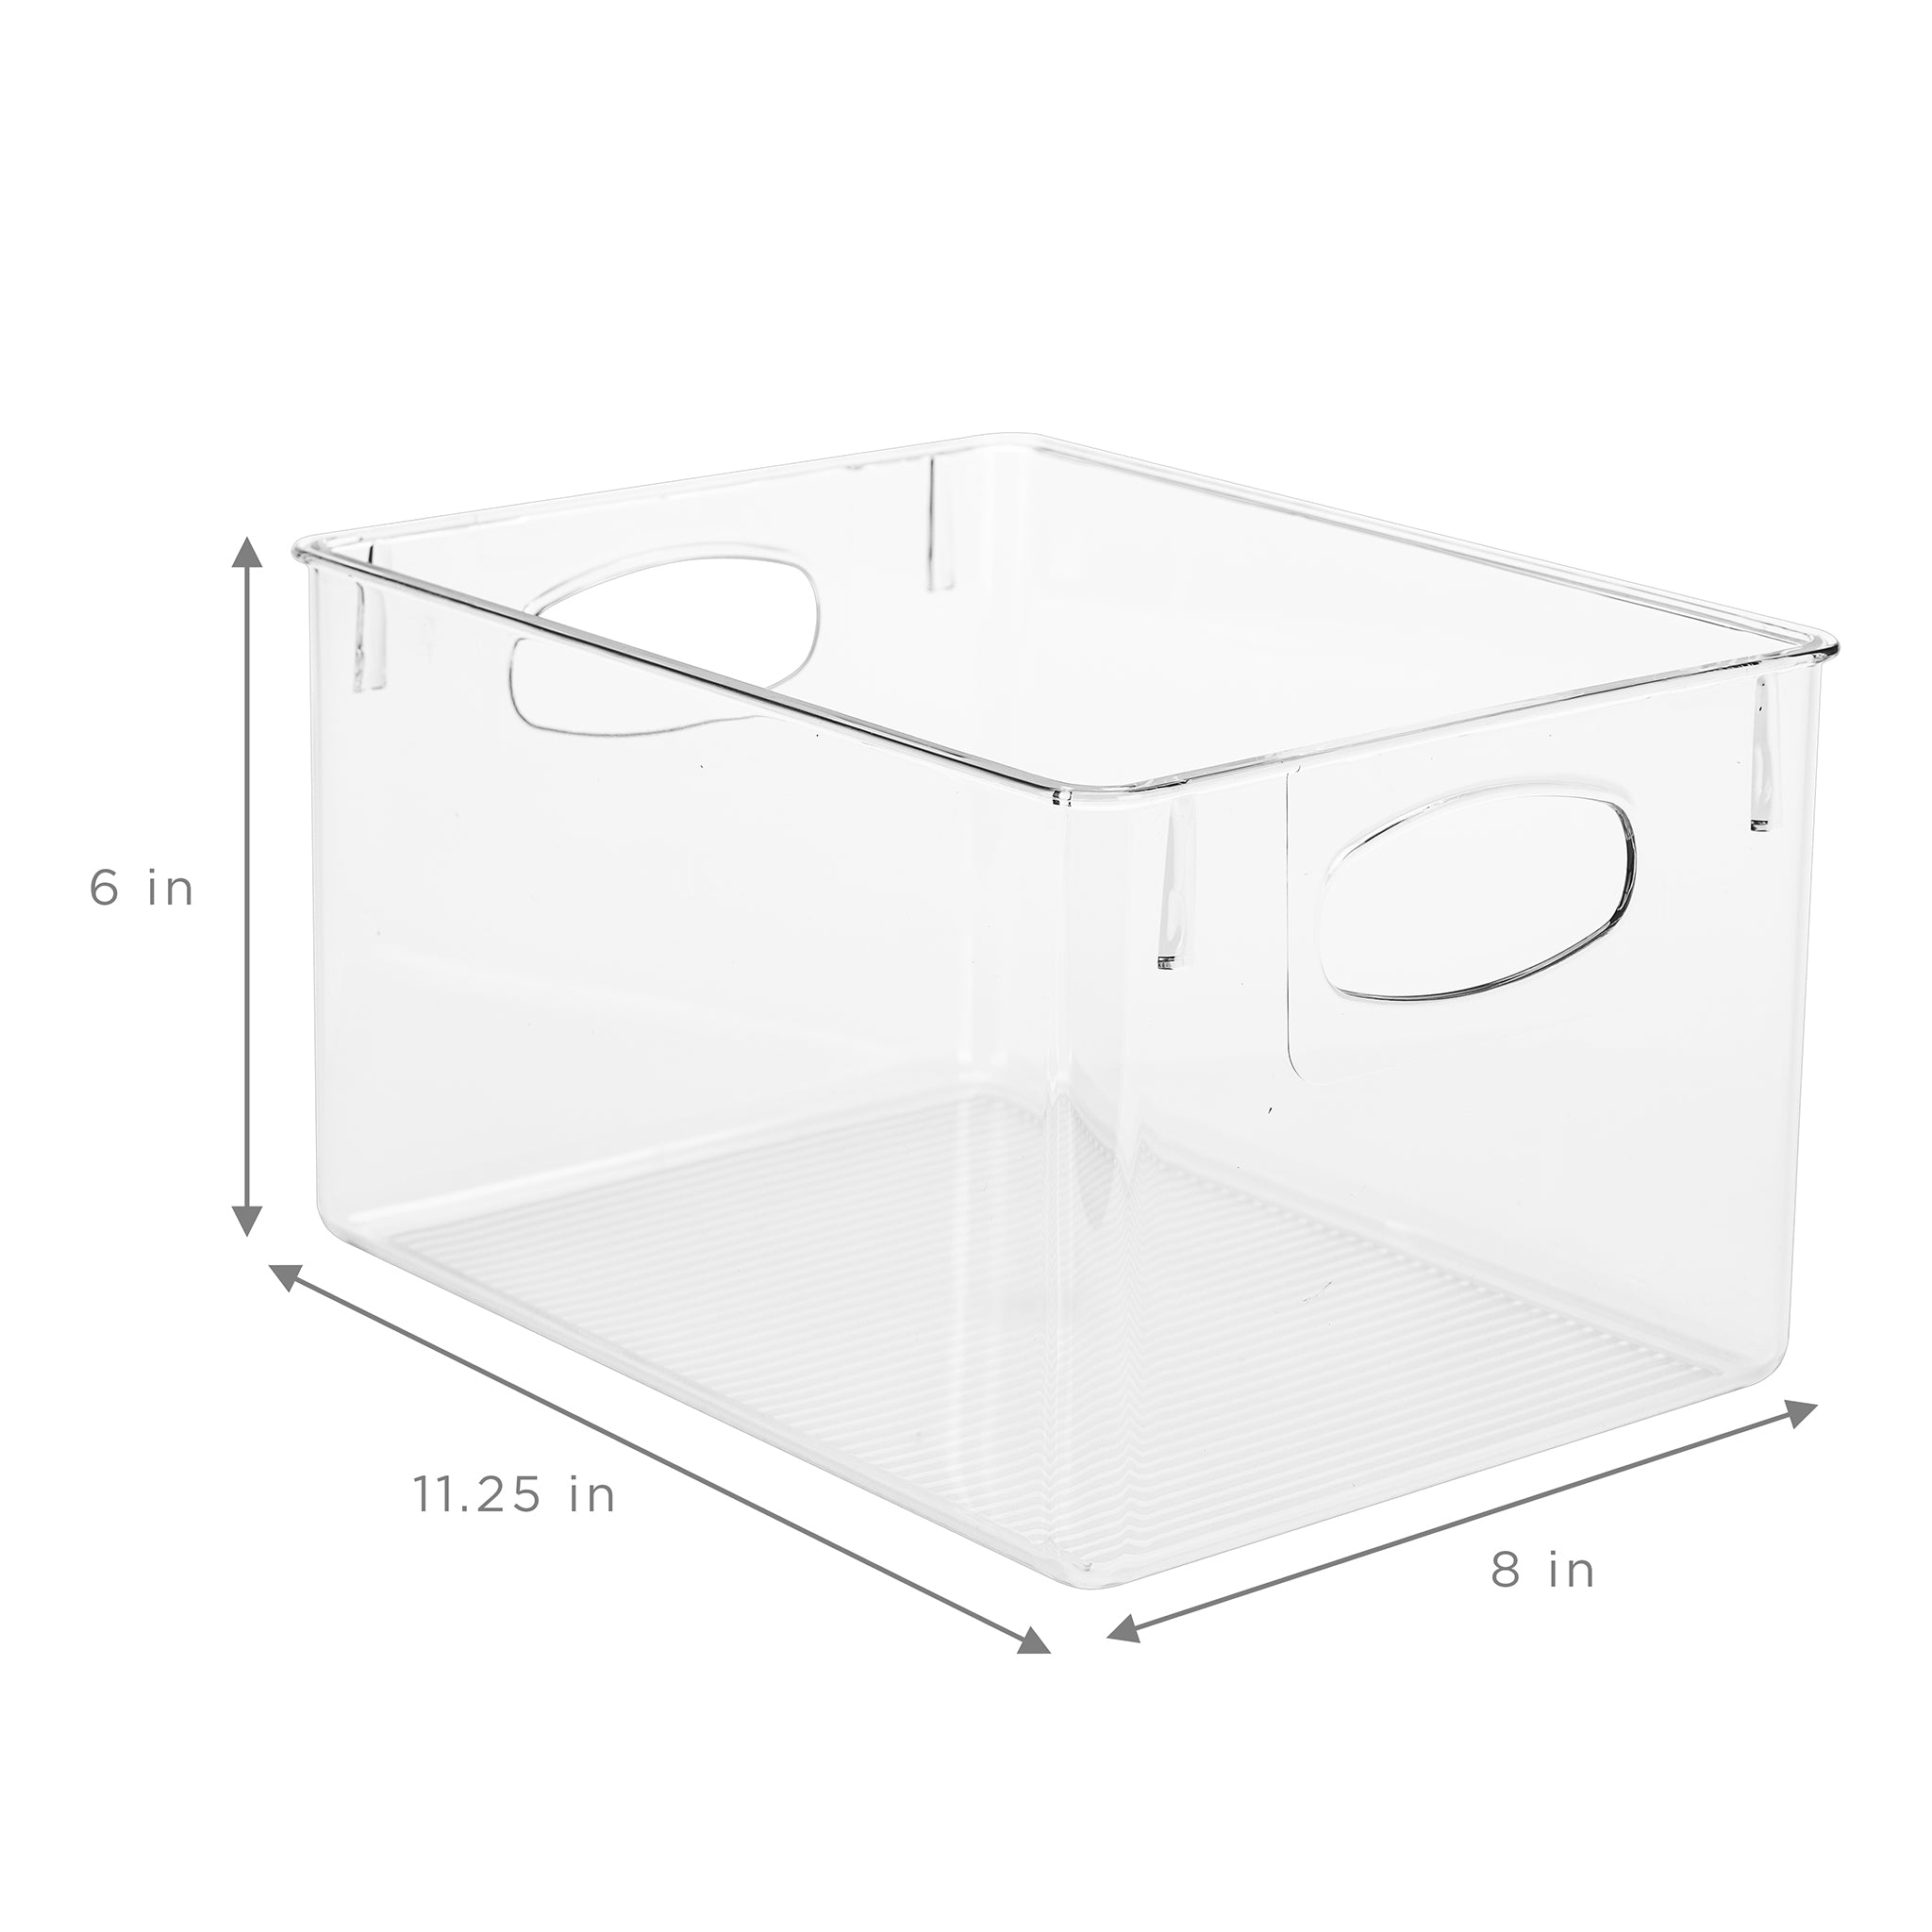 Stackable Refrigerator Organizer Bins, 6 Pack Clear Kitchen Organizer  Container Bins with Handles and 20 PCS Plastic Bags for Pantry, Cabinets